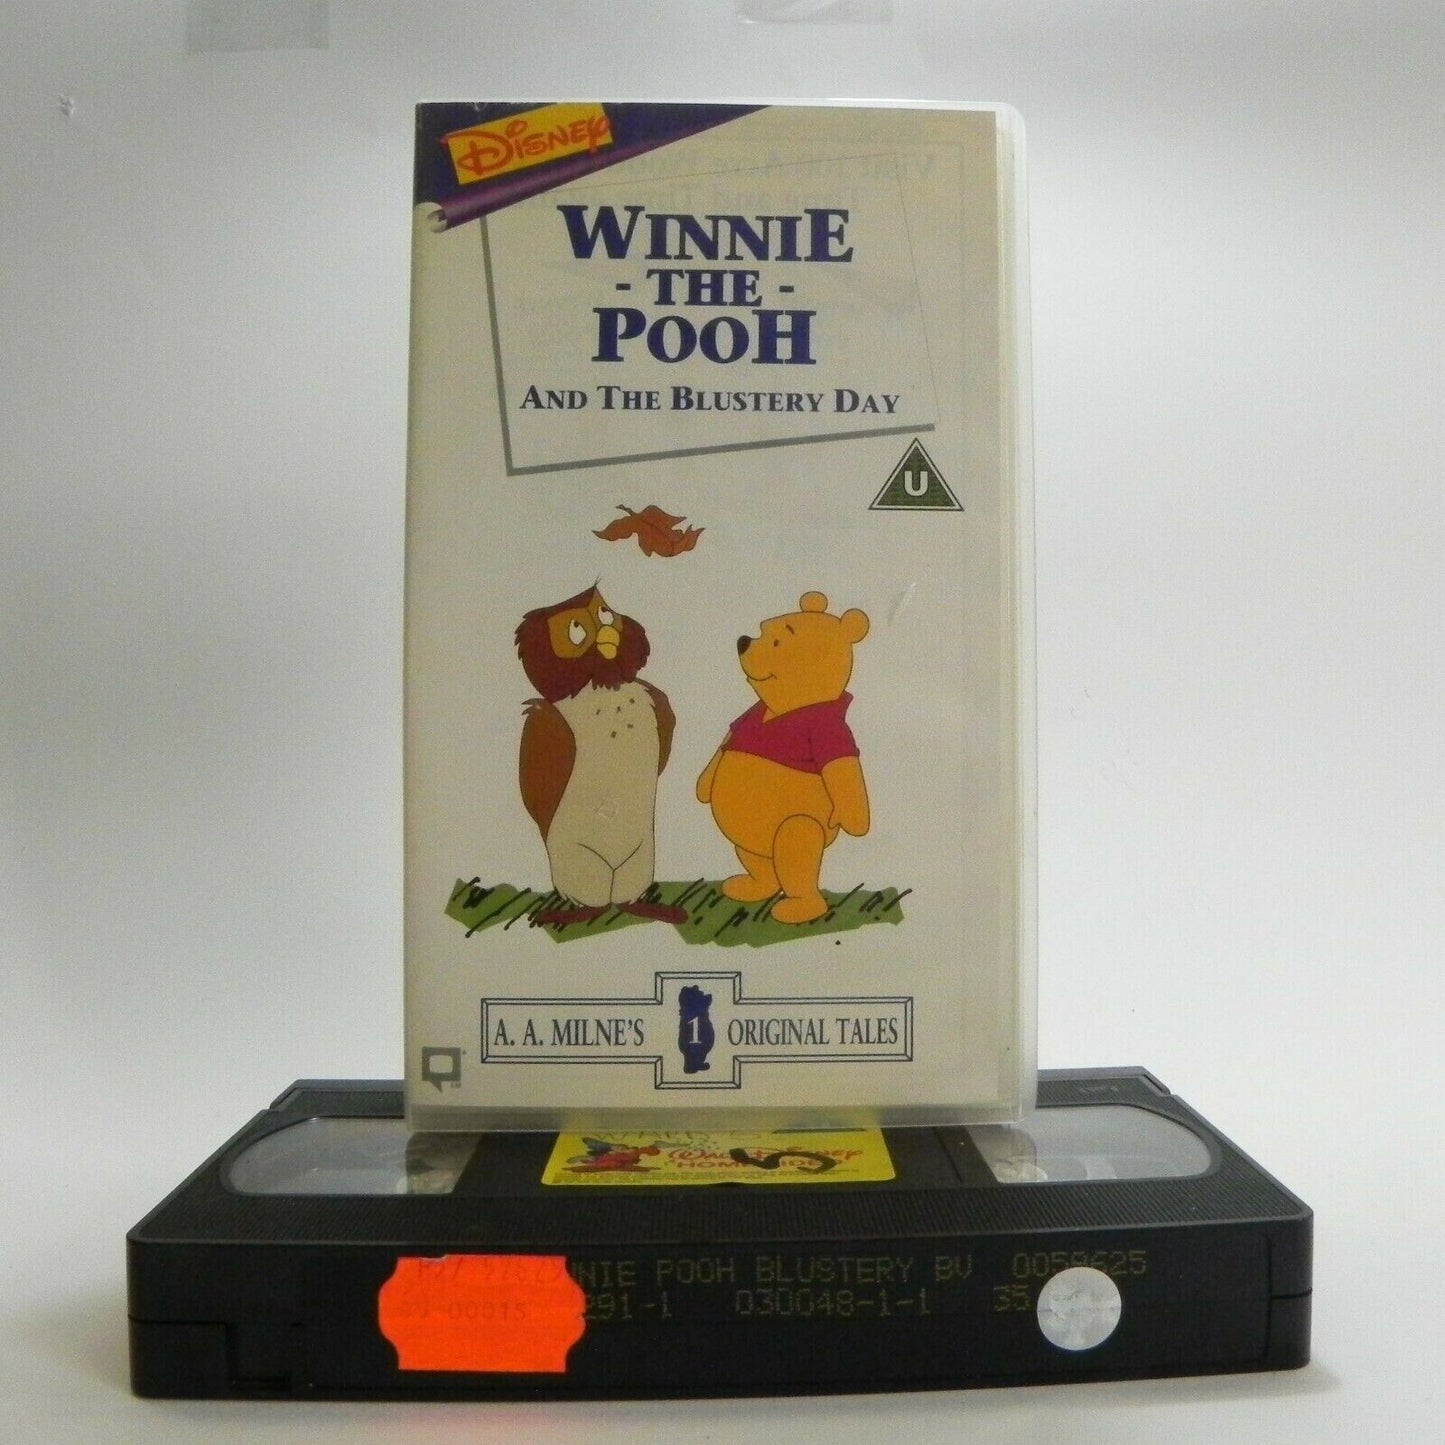 Winnie The Pooh And The Blustery Day - A.A. Milne's Original Tales - Kids - VHS-